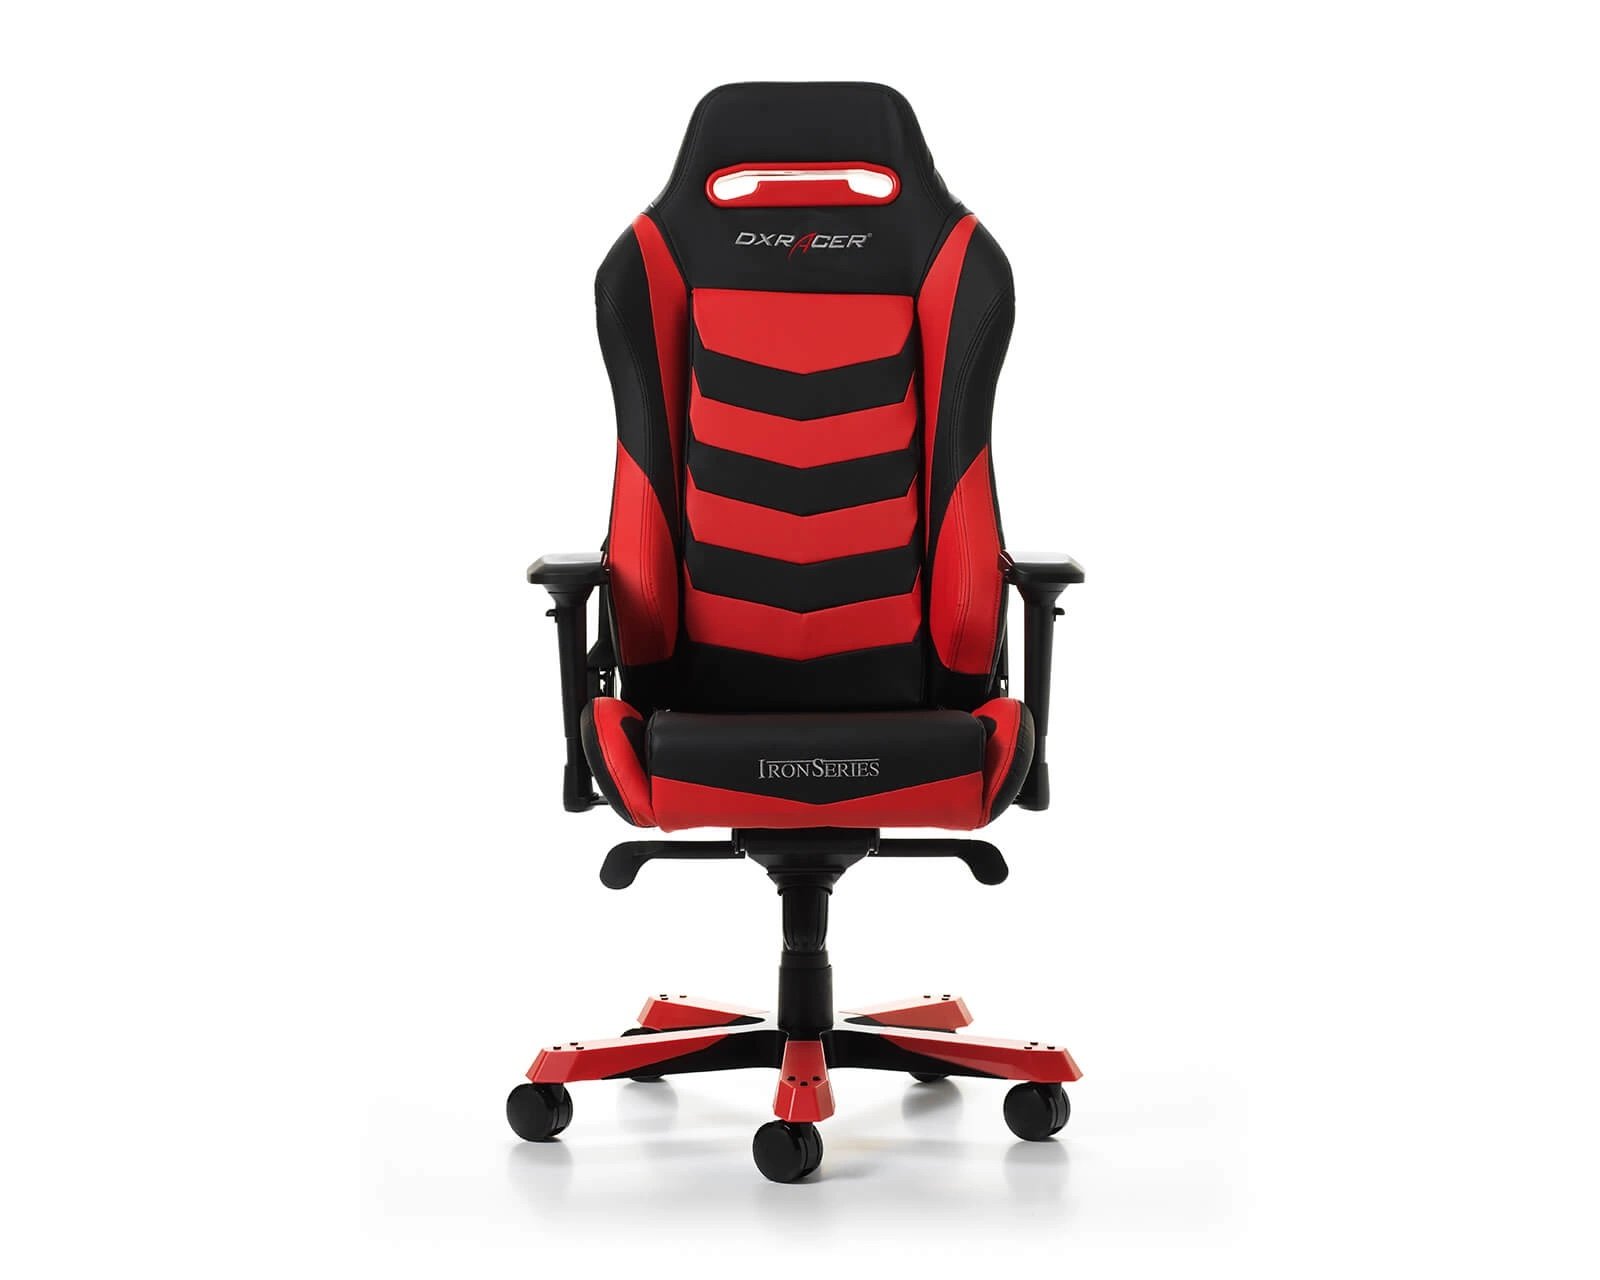 Why are gaming chairs so actively hostile?